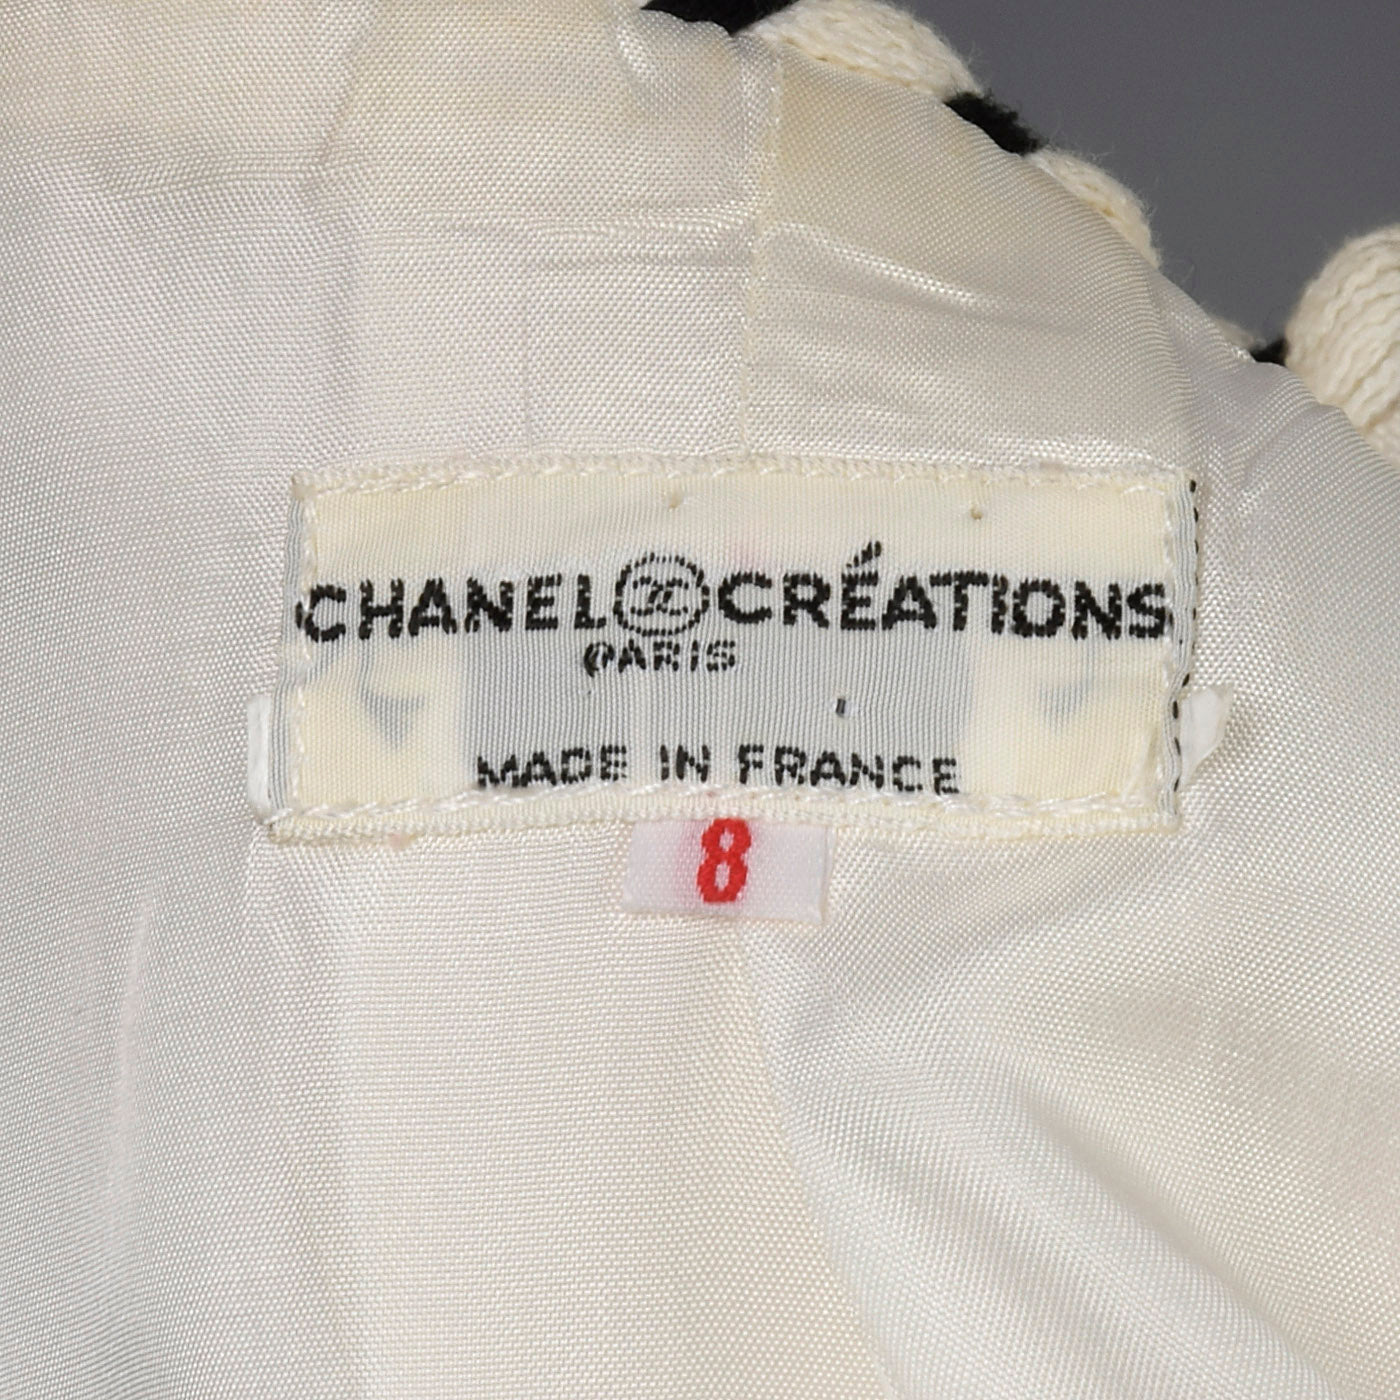 Chanel White Linen Jacket with Gold Logo Buttons and Black & White Trim